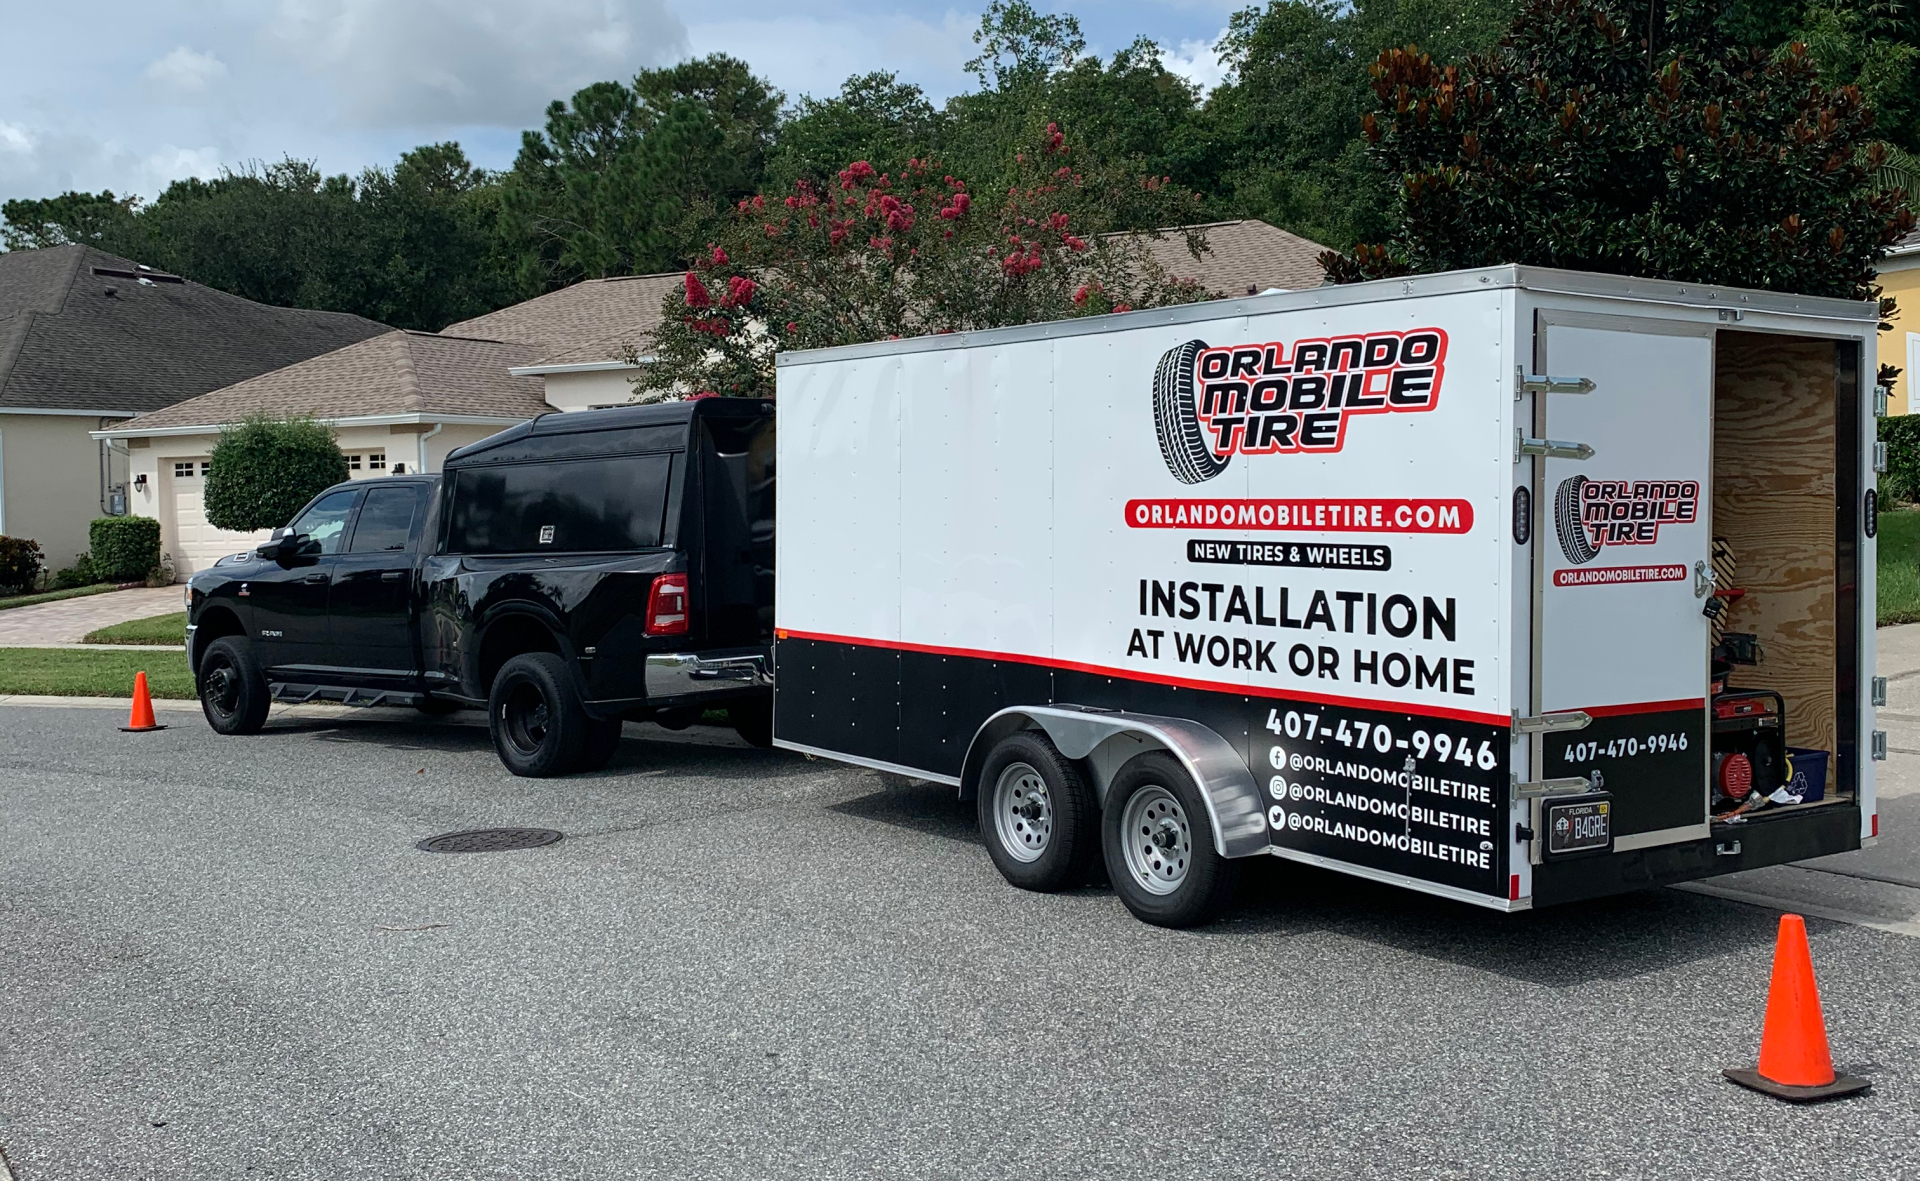 2019 - 7' x 16' Mobile Tire Shop Trailer / Mobile Tire Business for Sale in  Florida!